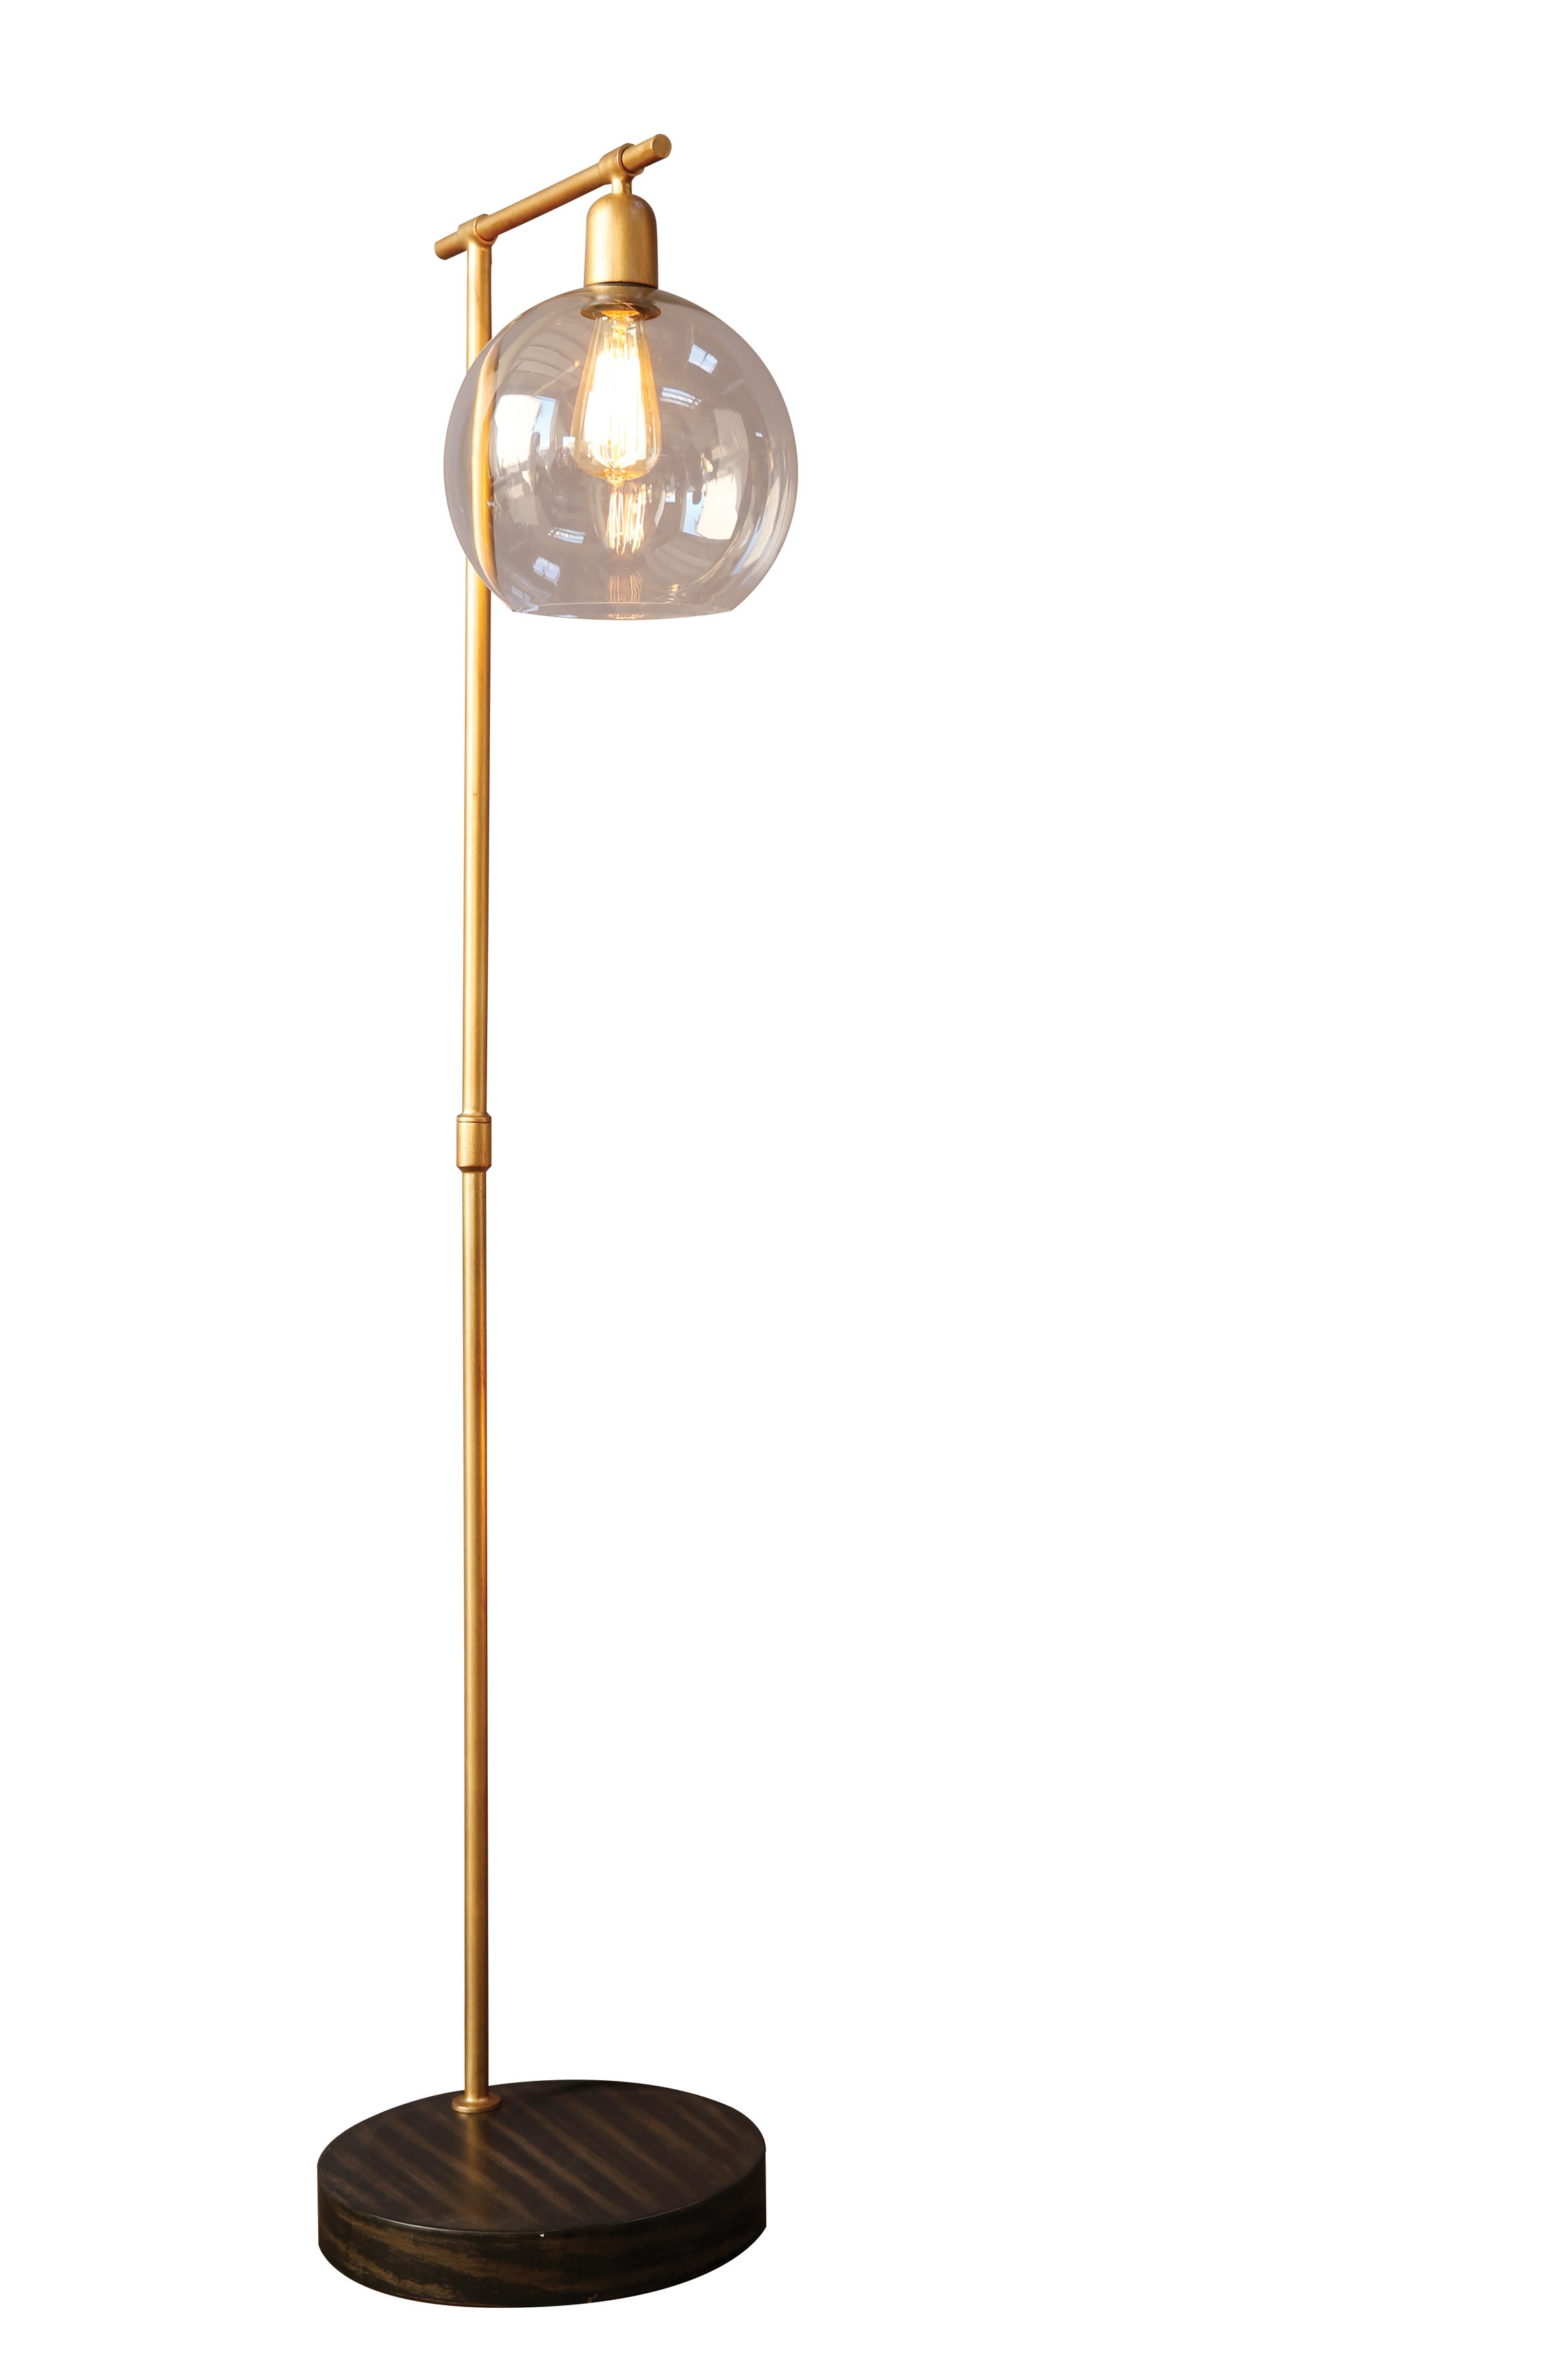 Metal & Wood Floor Lamp with Gold Finish and Glass Globe Shade - Image 0